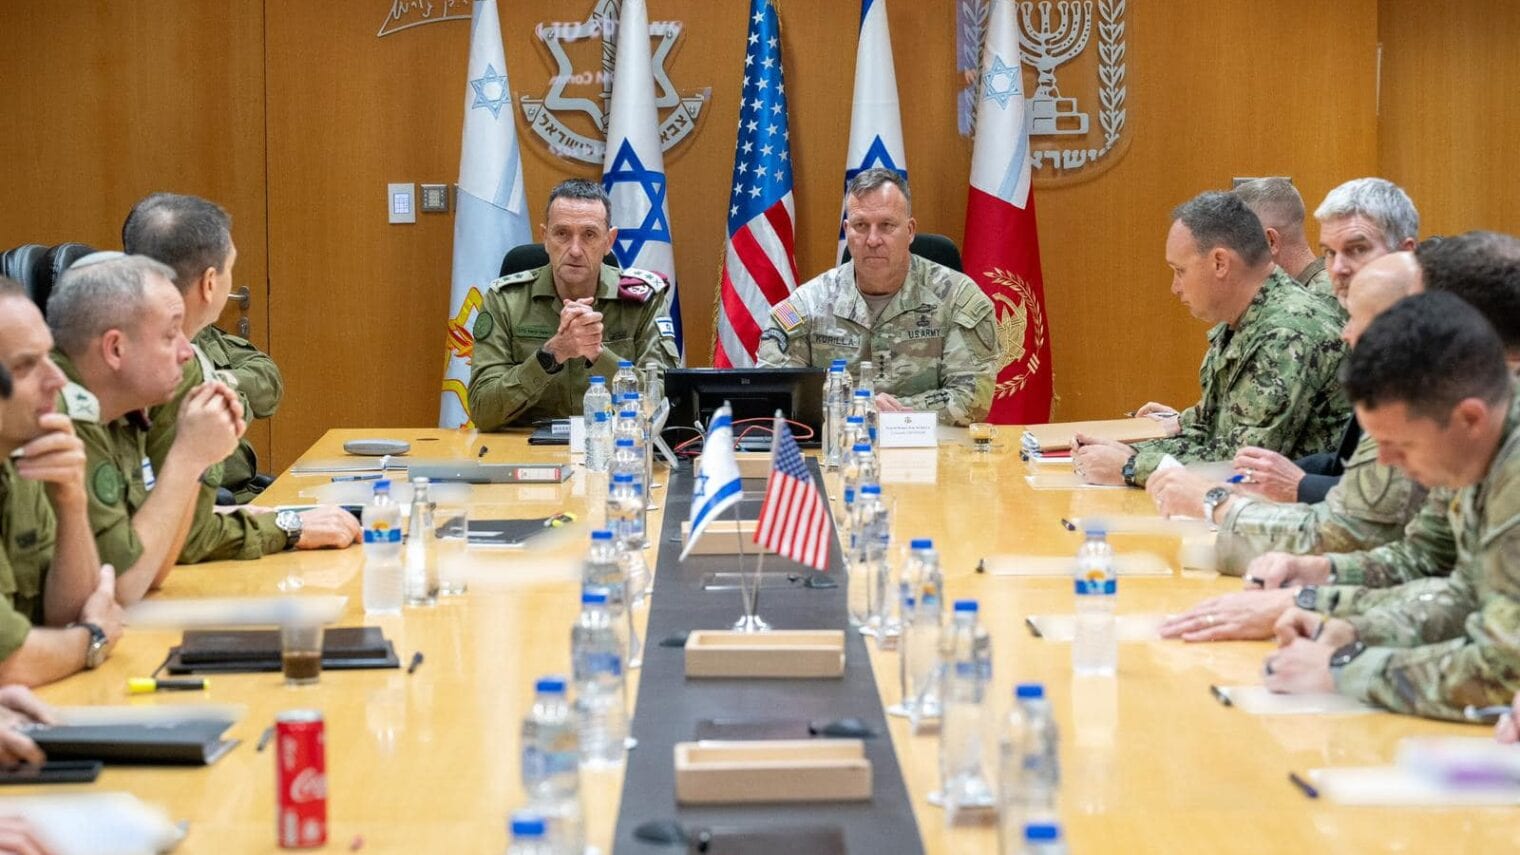 IDF Chief of the General Staff Herzi Halevi and CENTCOM Commander, General Michael Erik Kurilla, conducting a comprehensive situational assessment with IDF officials on the IDF’s readiness in case of Iranian attack, April 12, 2024. Photo courtesy of IDF